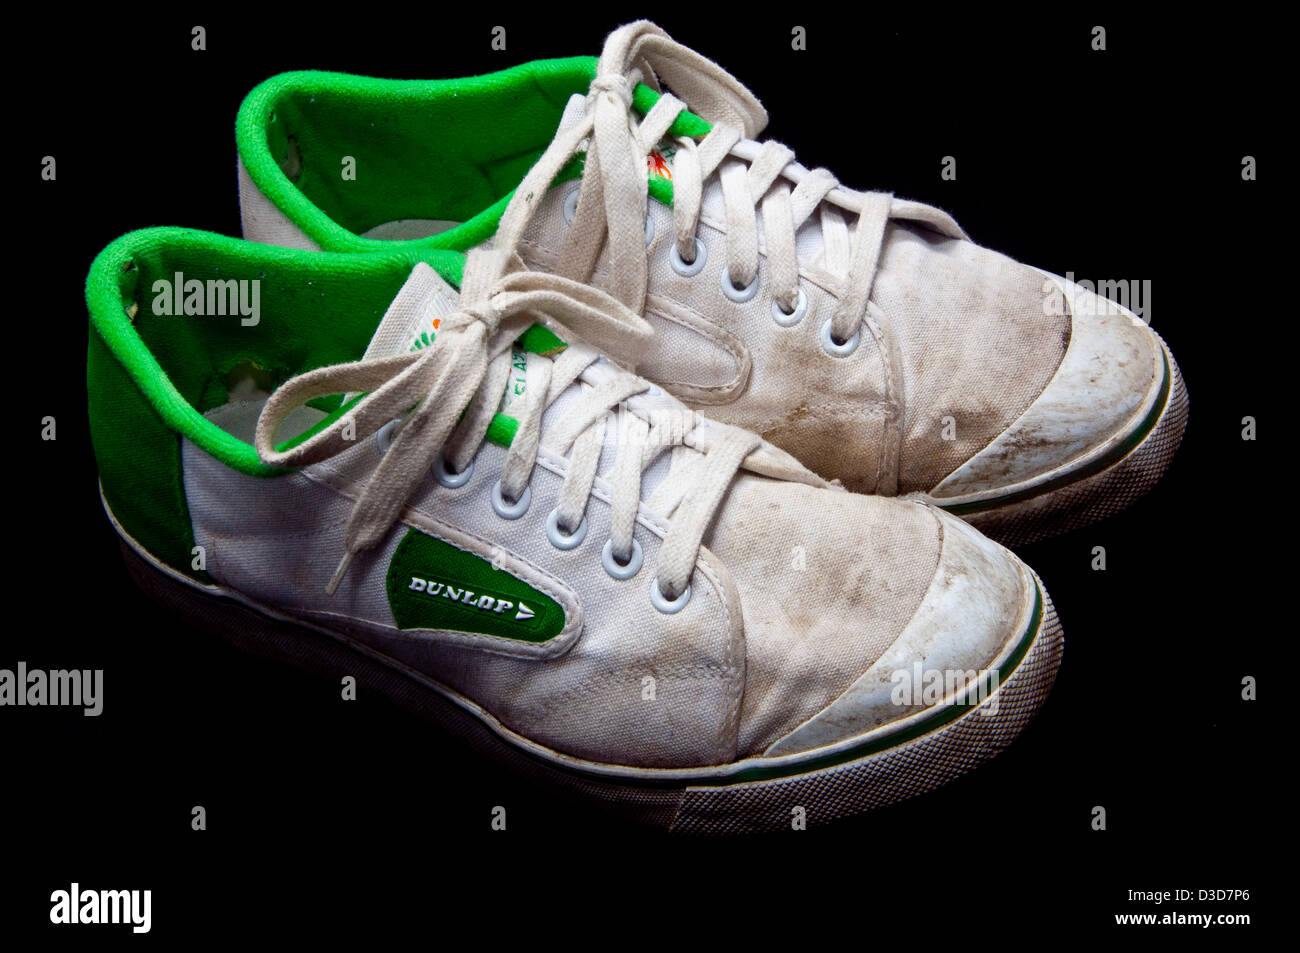 green dunlop trainers